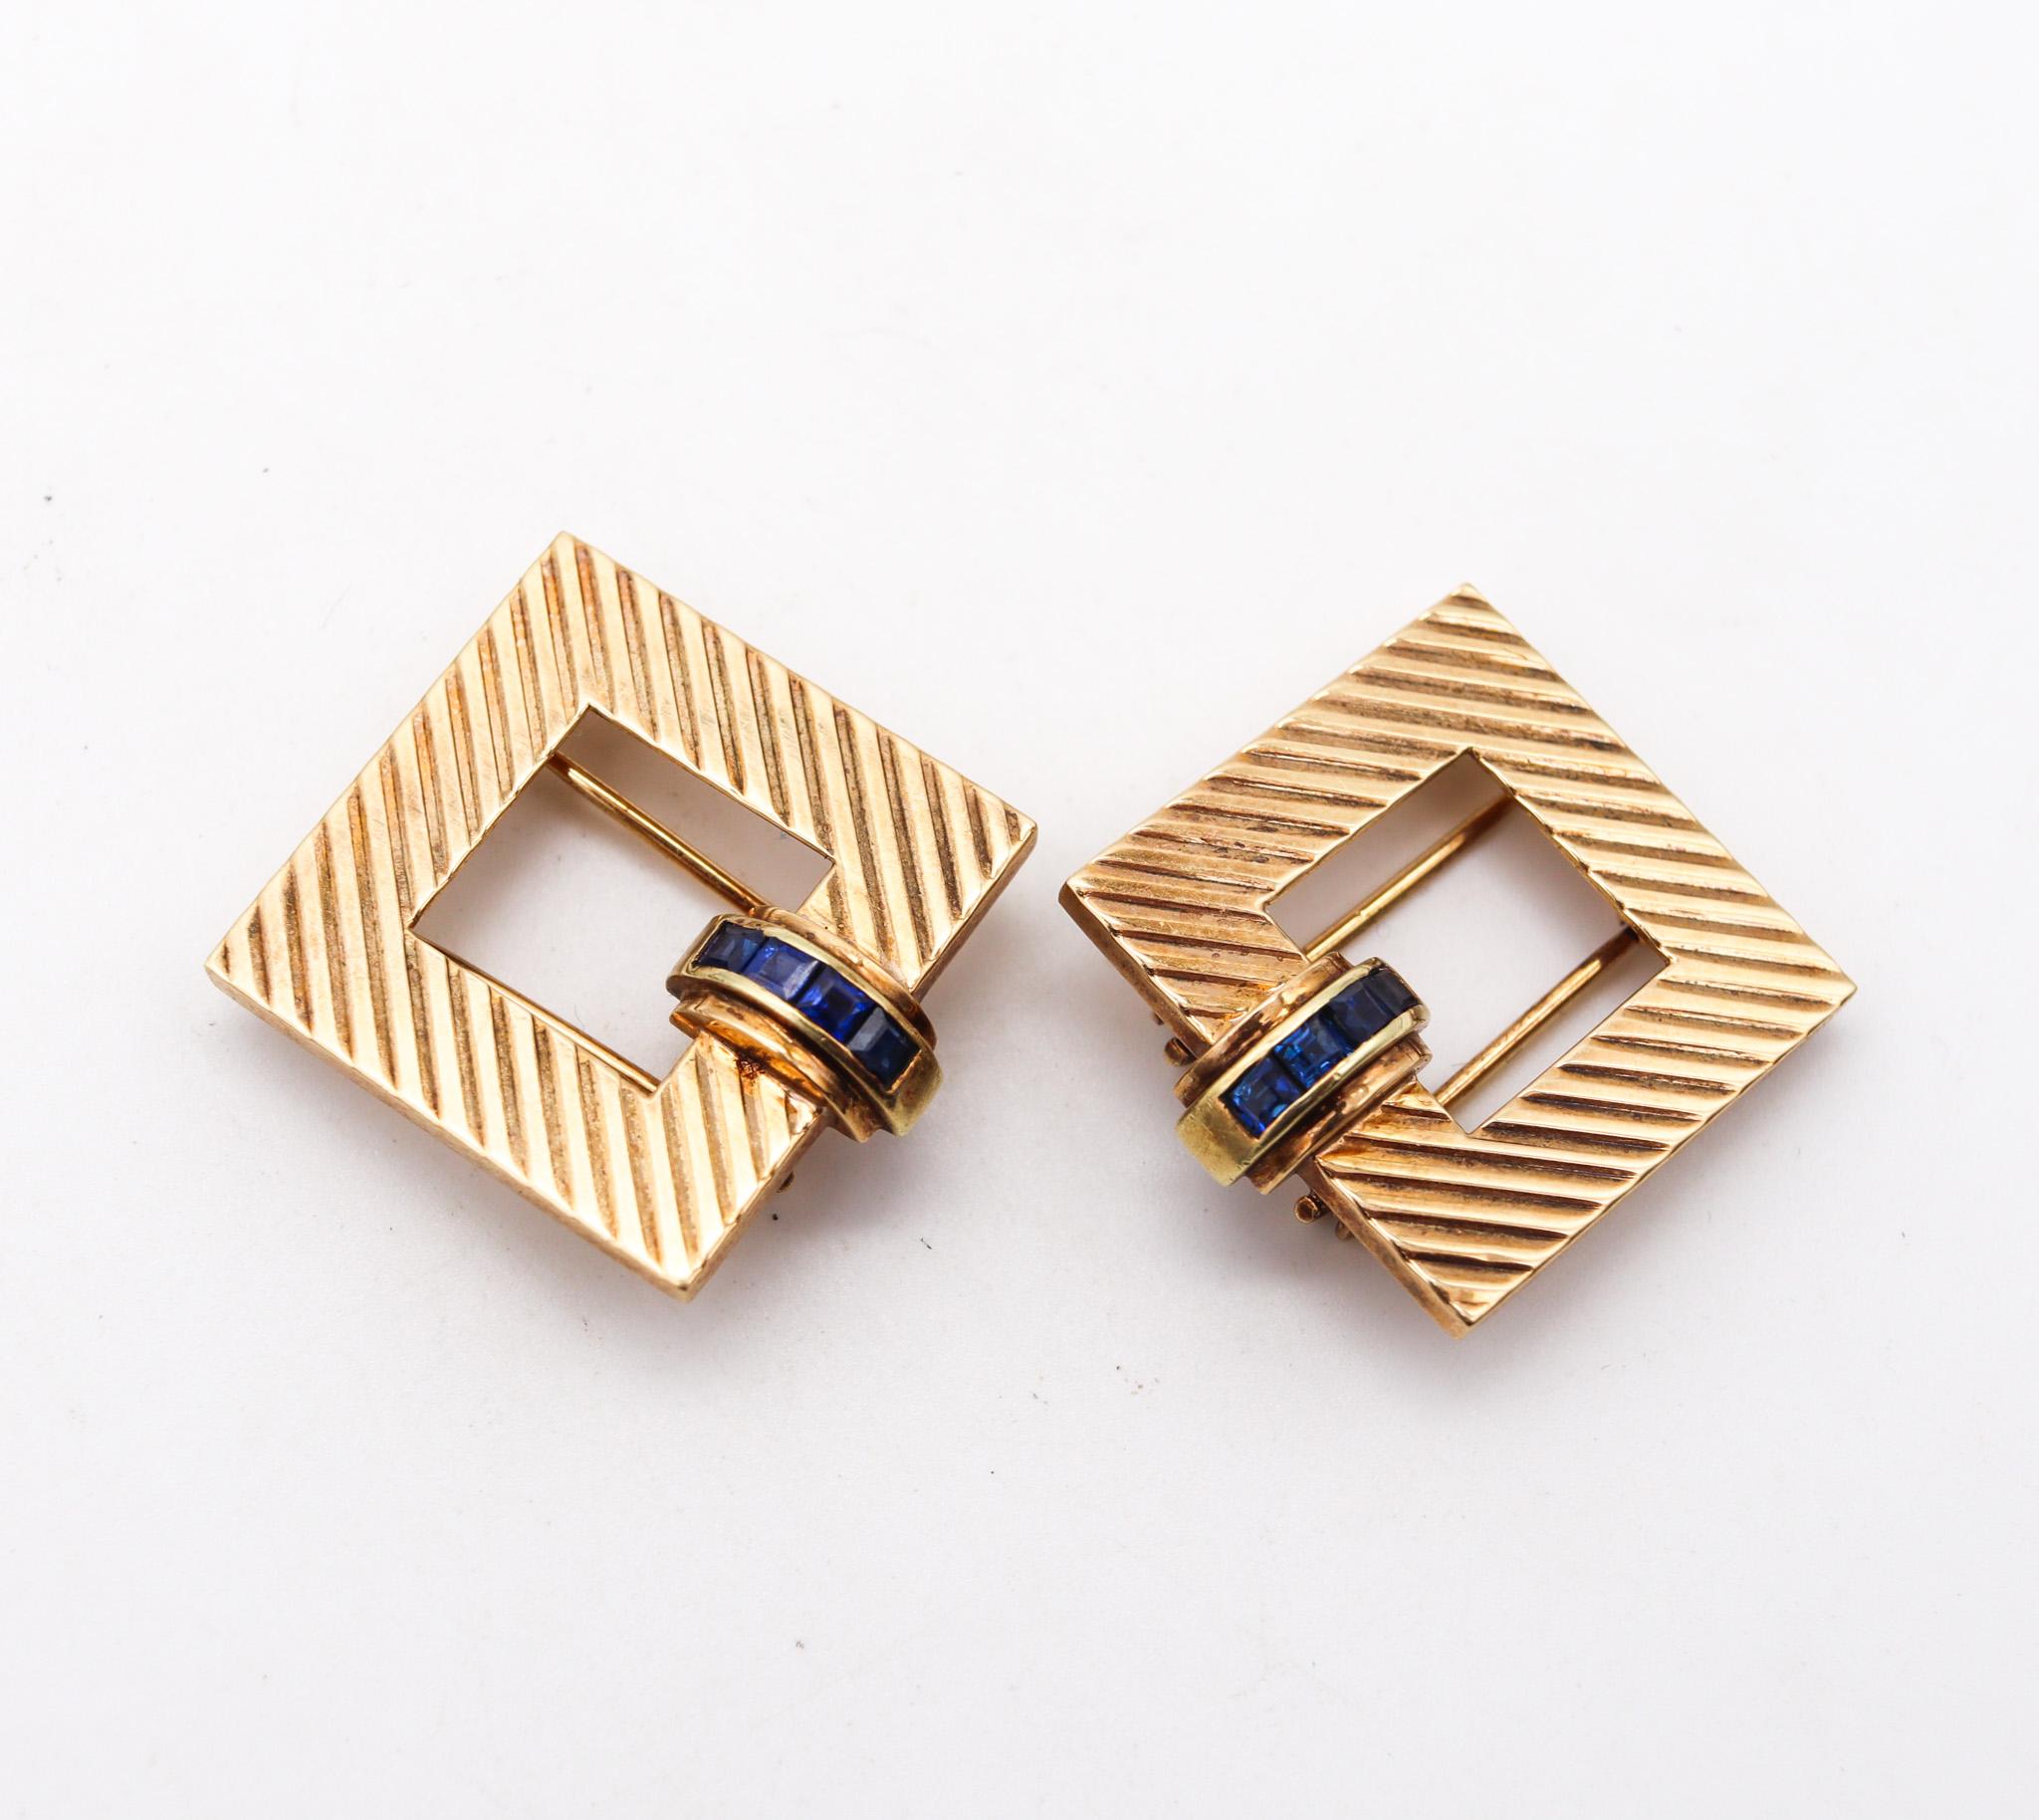 Tiffany & Co. 1940 Art Deco Square Dress Clips In 14Kt Yellow Gold With Sapphire In Excellent Condition For Sale In Miami, FL